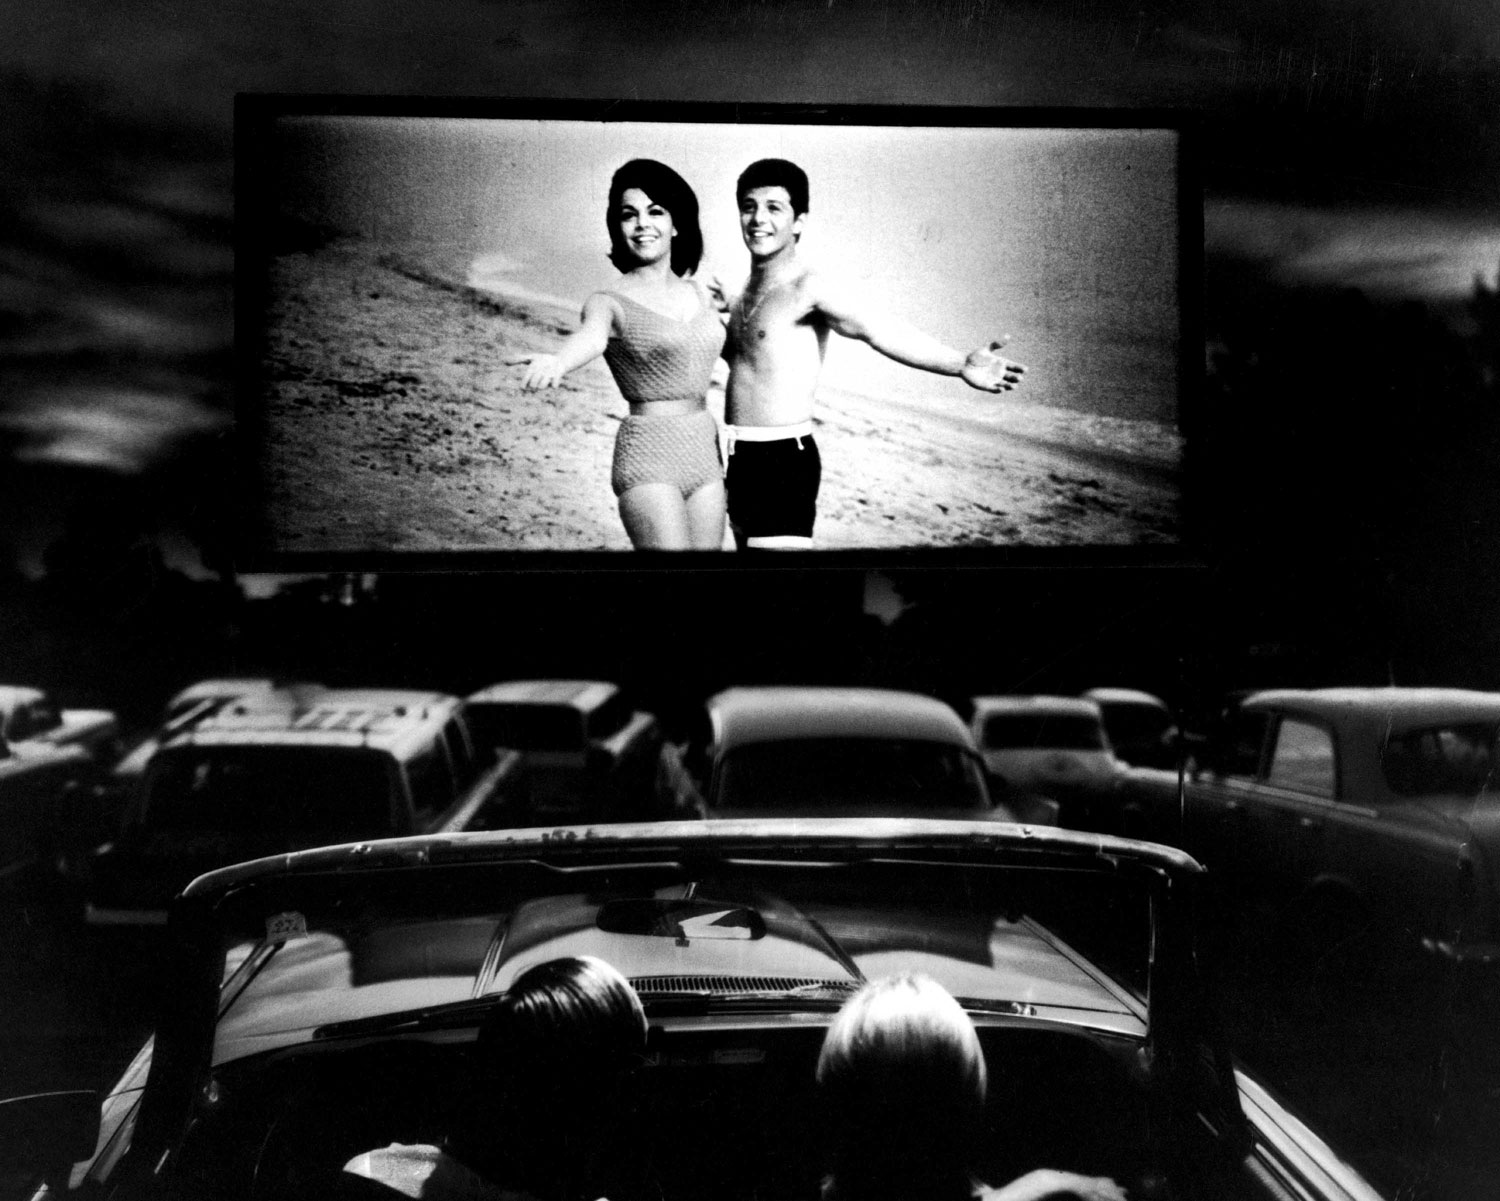 Annette Funicello and Frankie Avalon in a scene from Beach Blanket Bingo, shown at a drive-in movie theater in Florida, 1965.